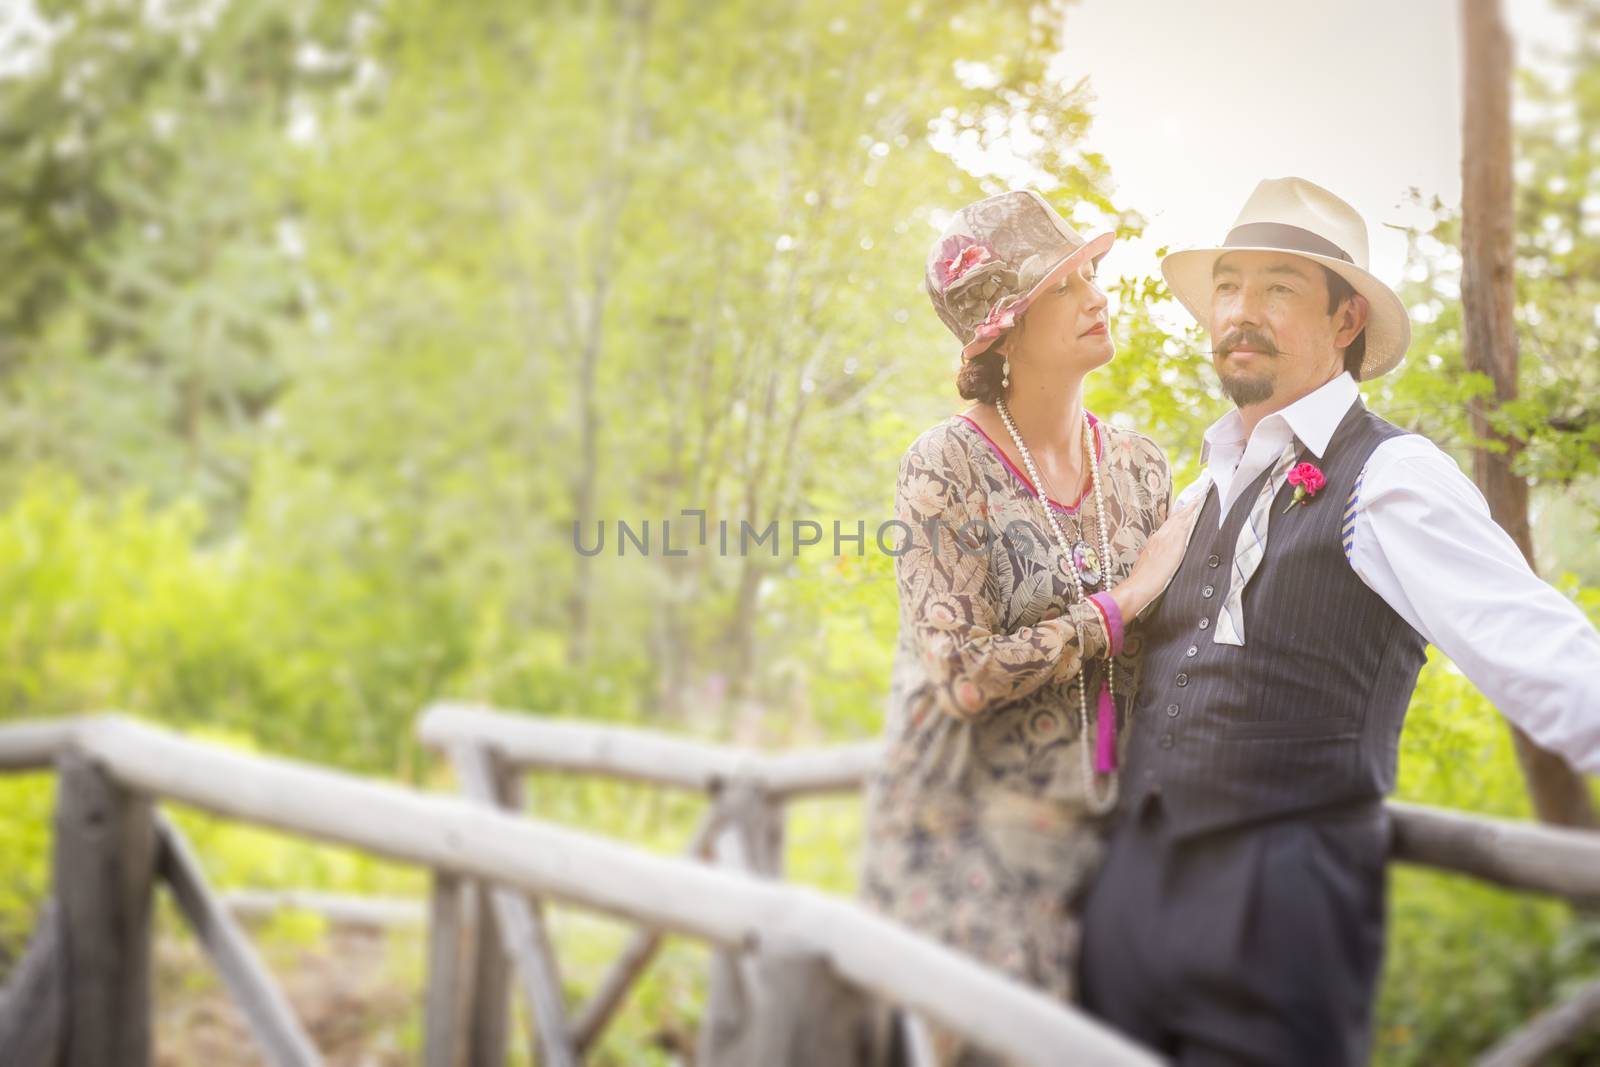 1920s Dressed Romantic Couple on Wooden Bridge by Feverpitched